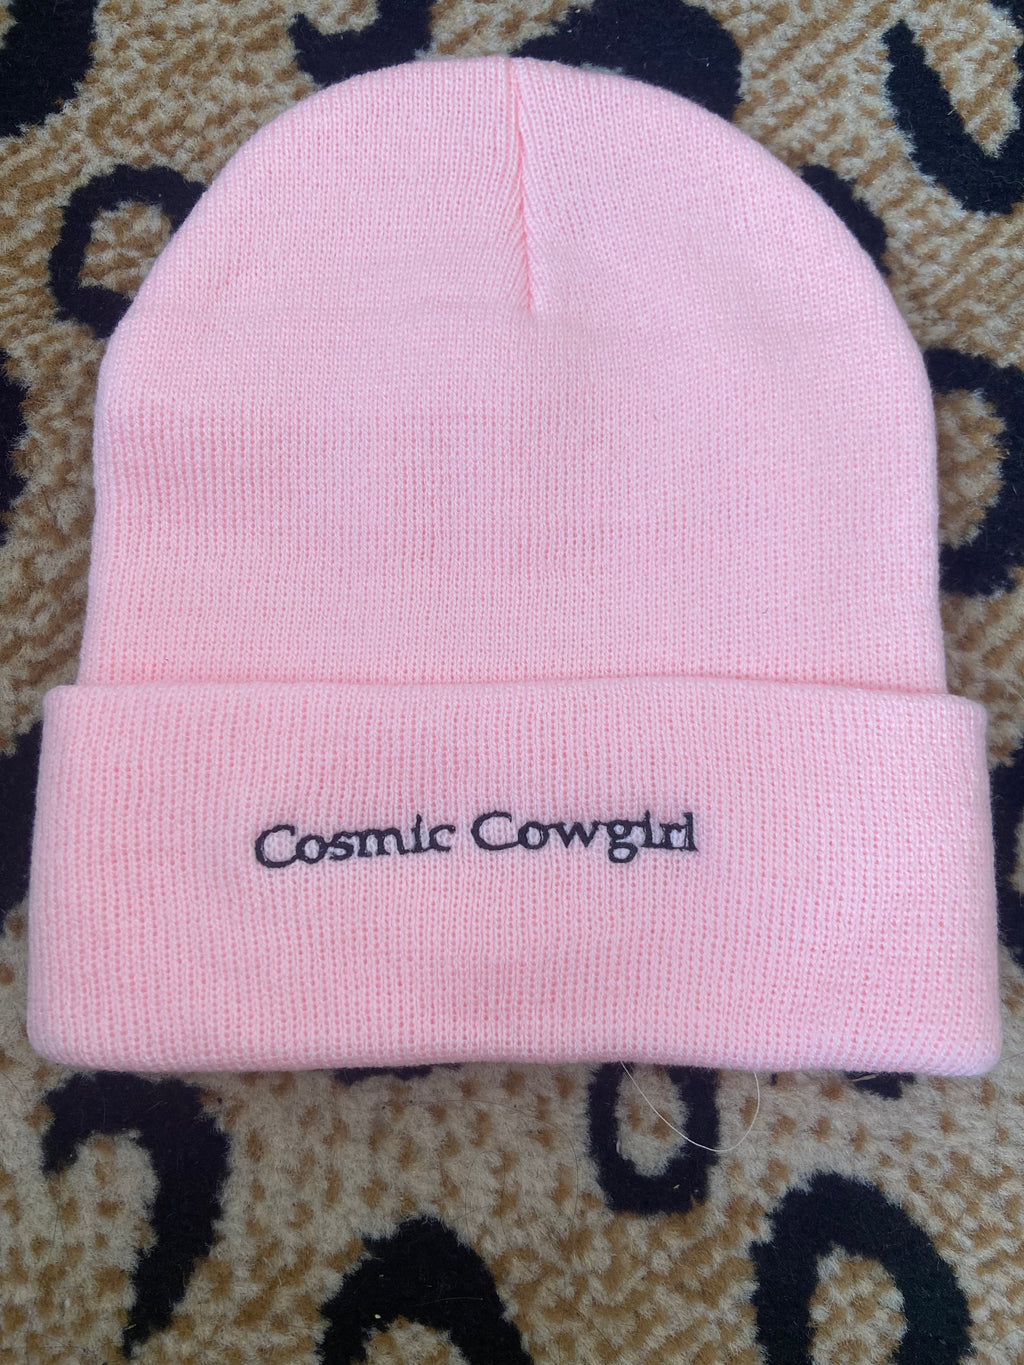 Cosmic cowgirl light pink beanie